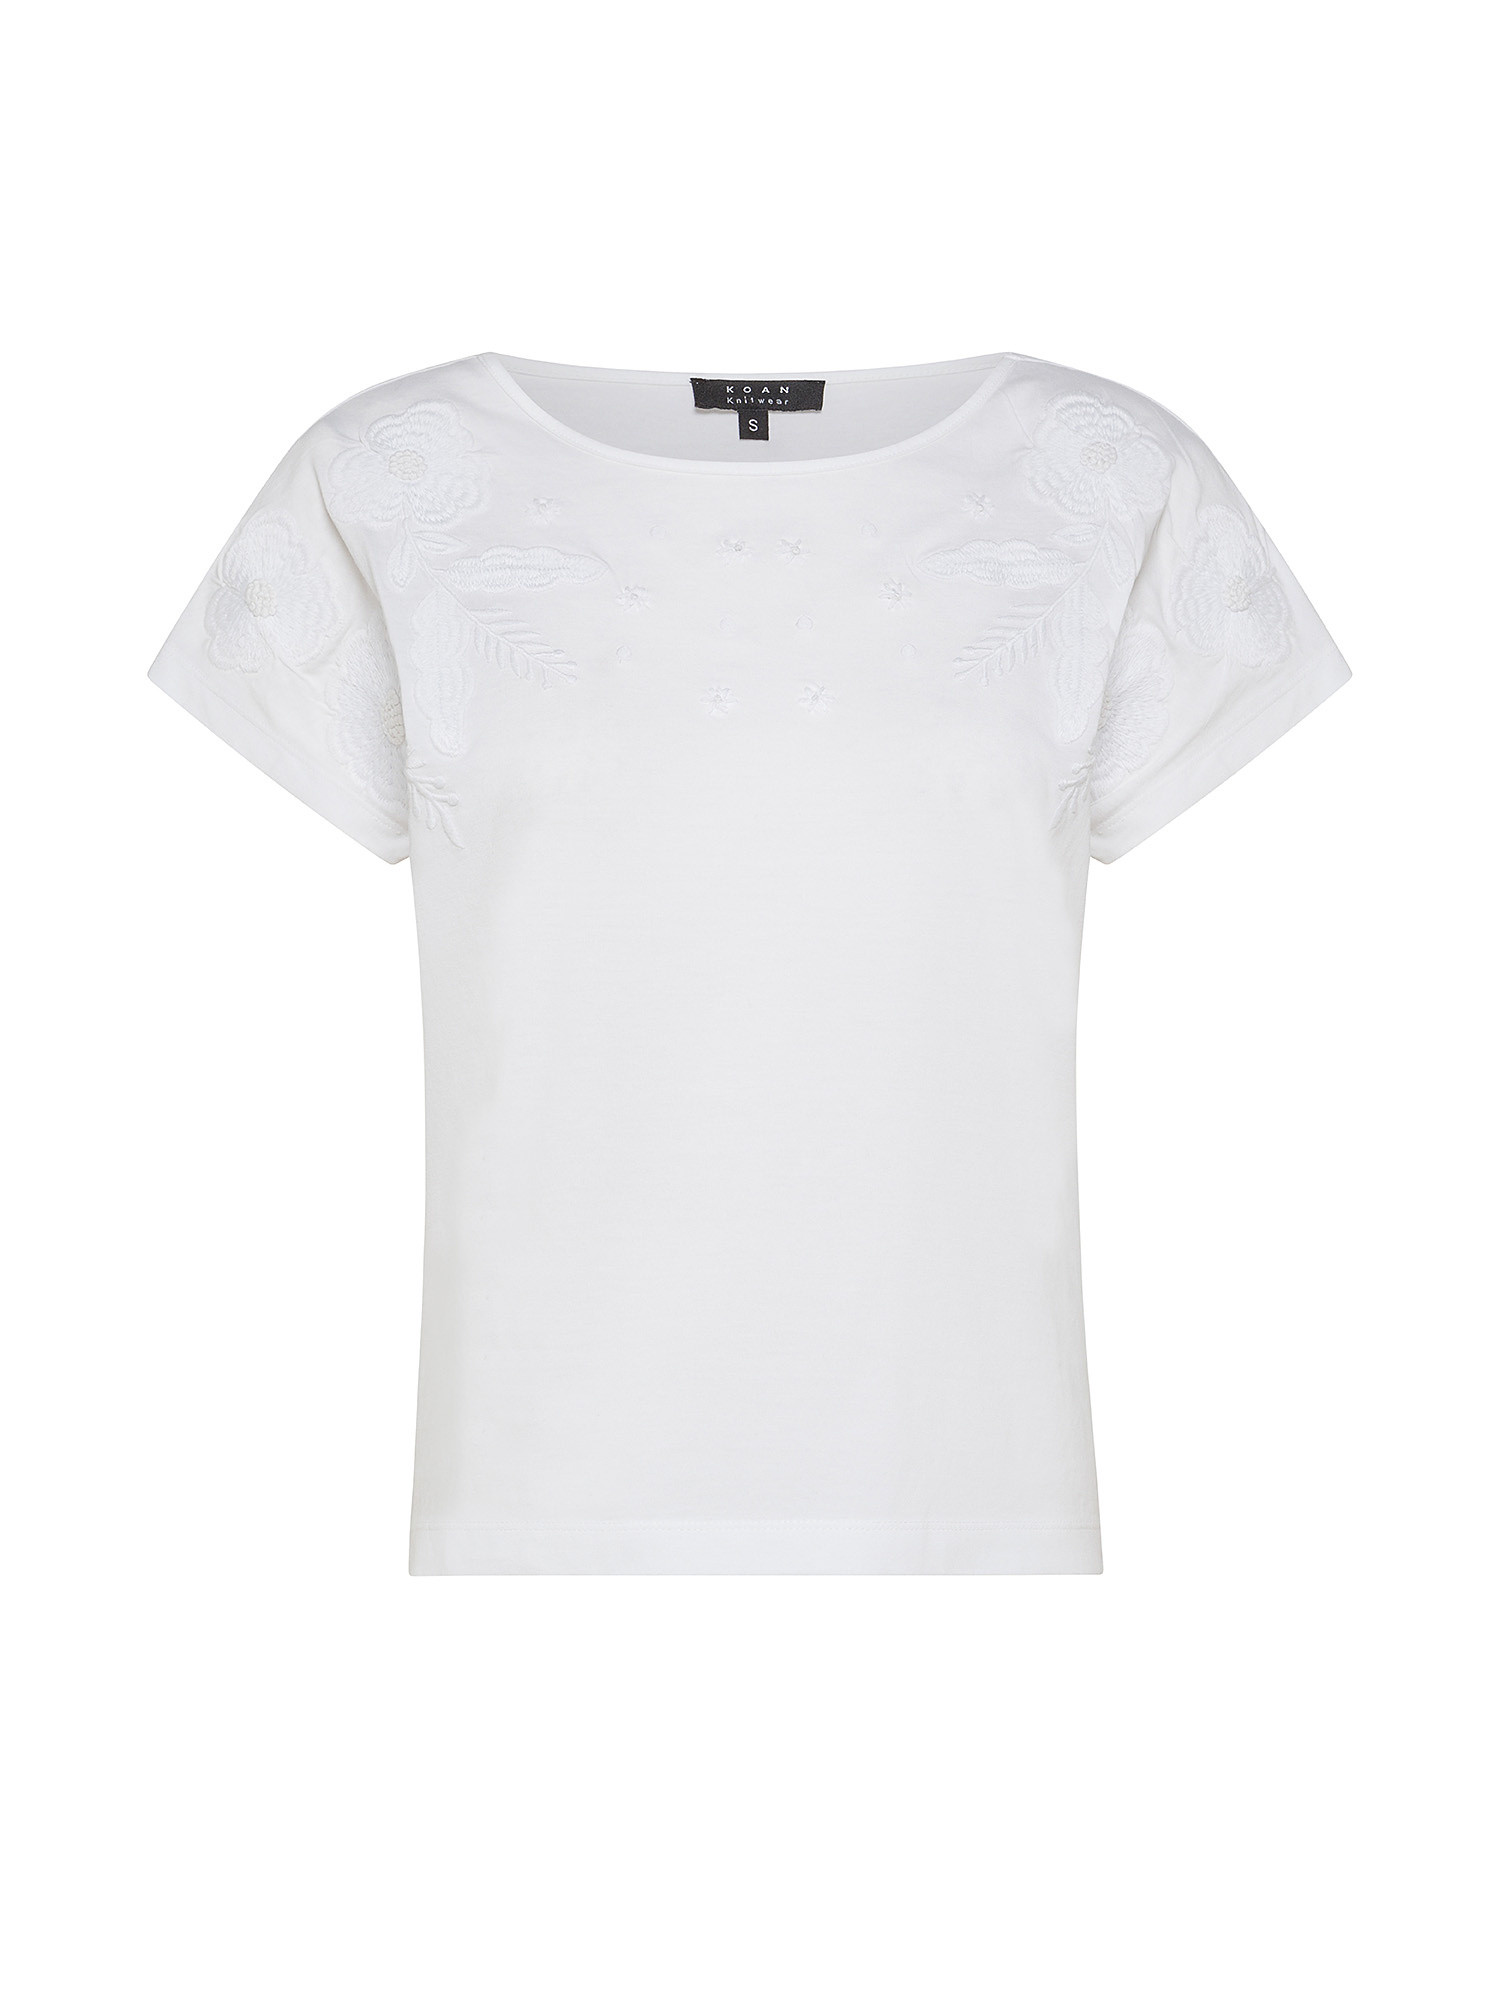 Koan - T-shirt with embroidery, White, large image number 0